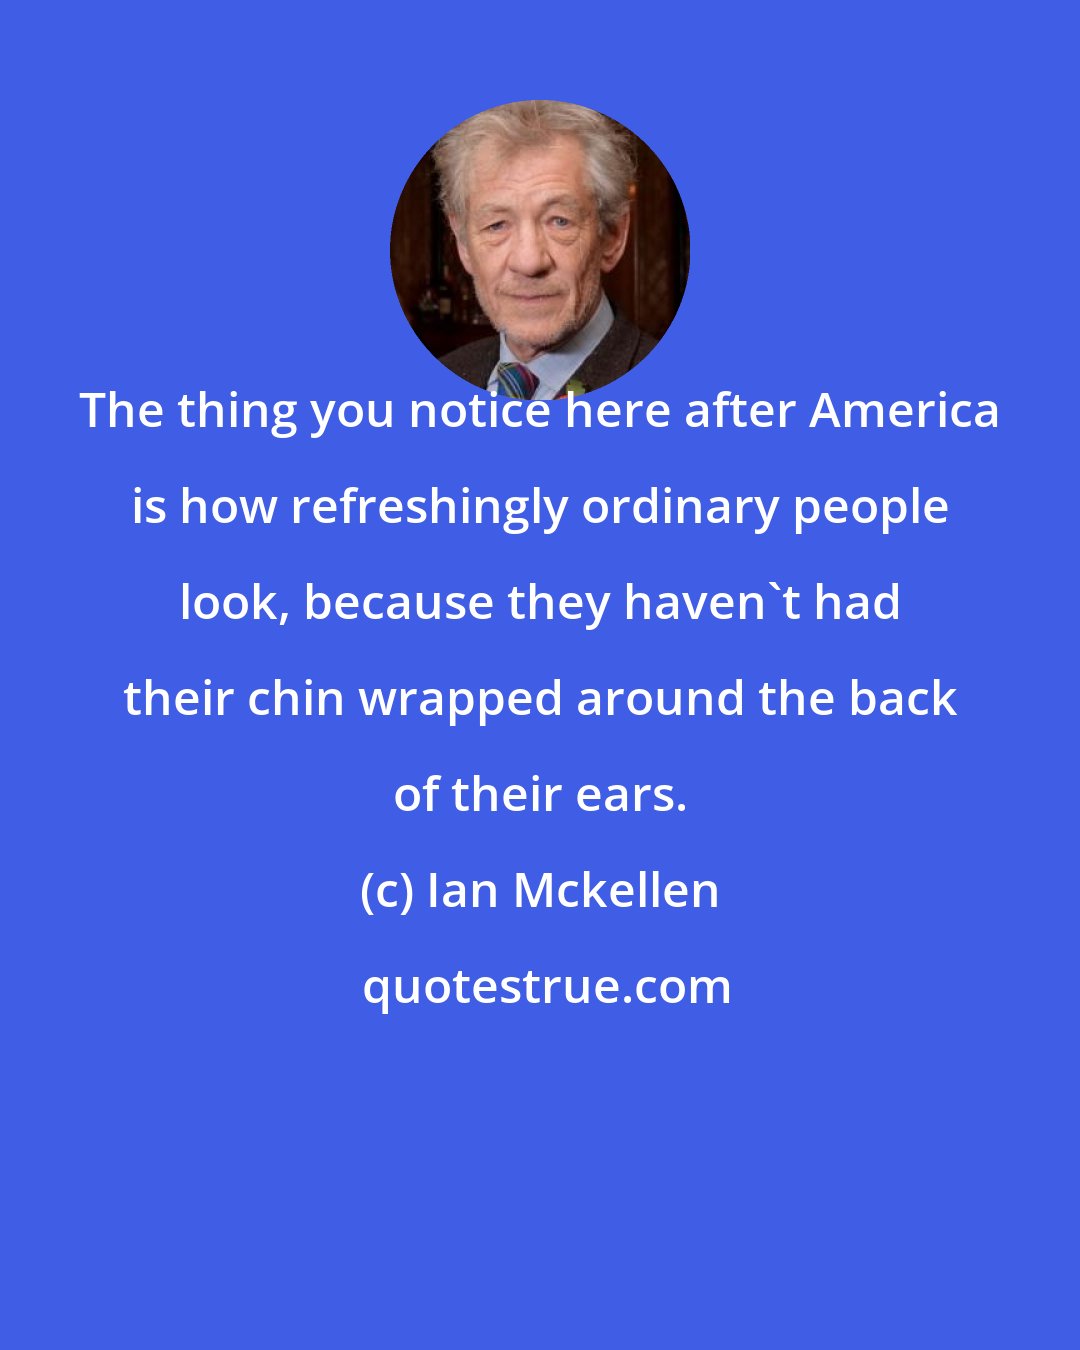 Ian Mckellen: The thing you notice here after America is how refreshingly ordinary people look, because they haven't had their chin wrapped around the back of their ears.